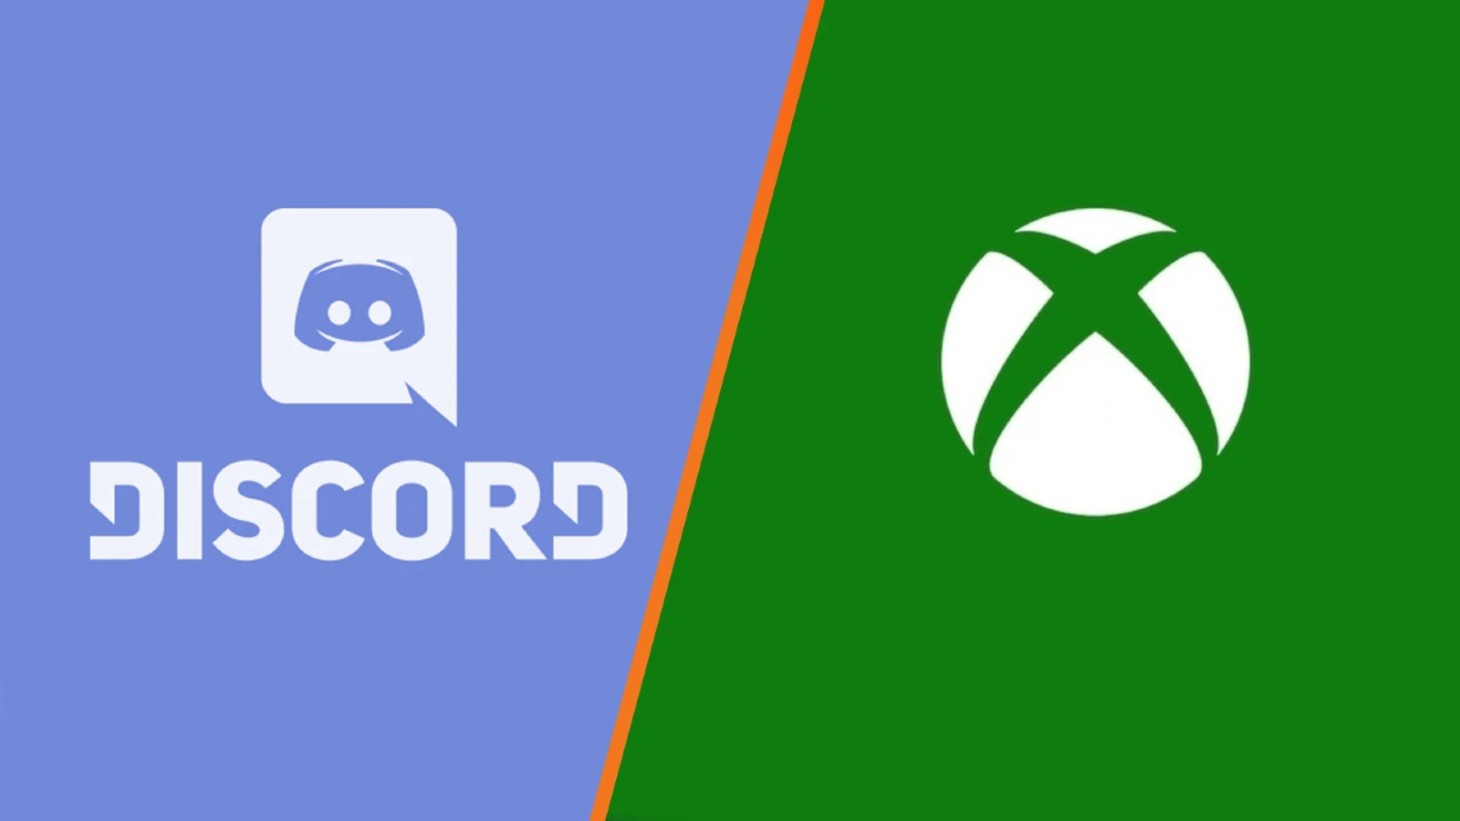 Xbox and Discord